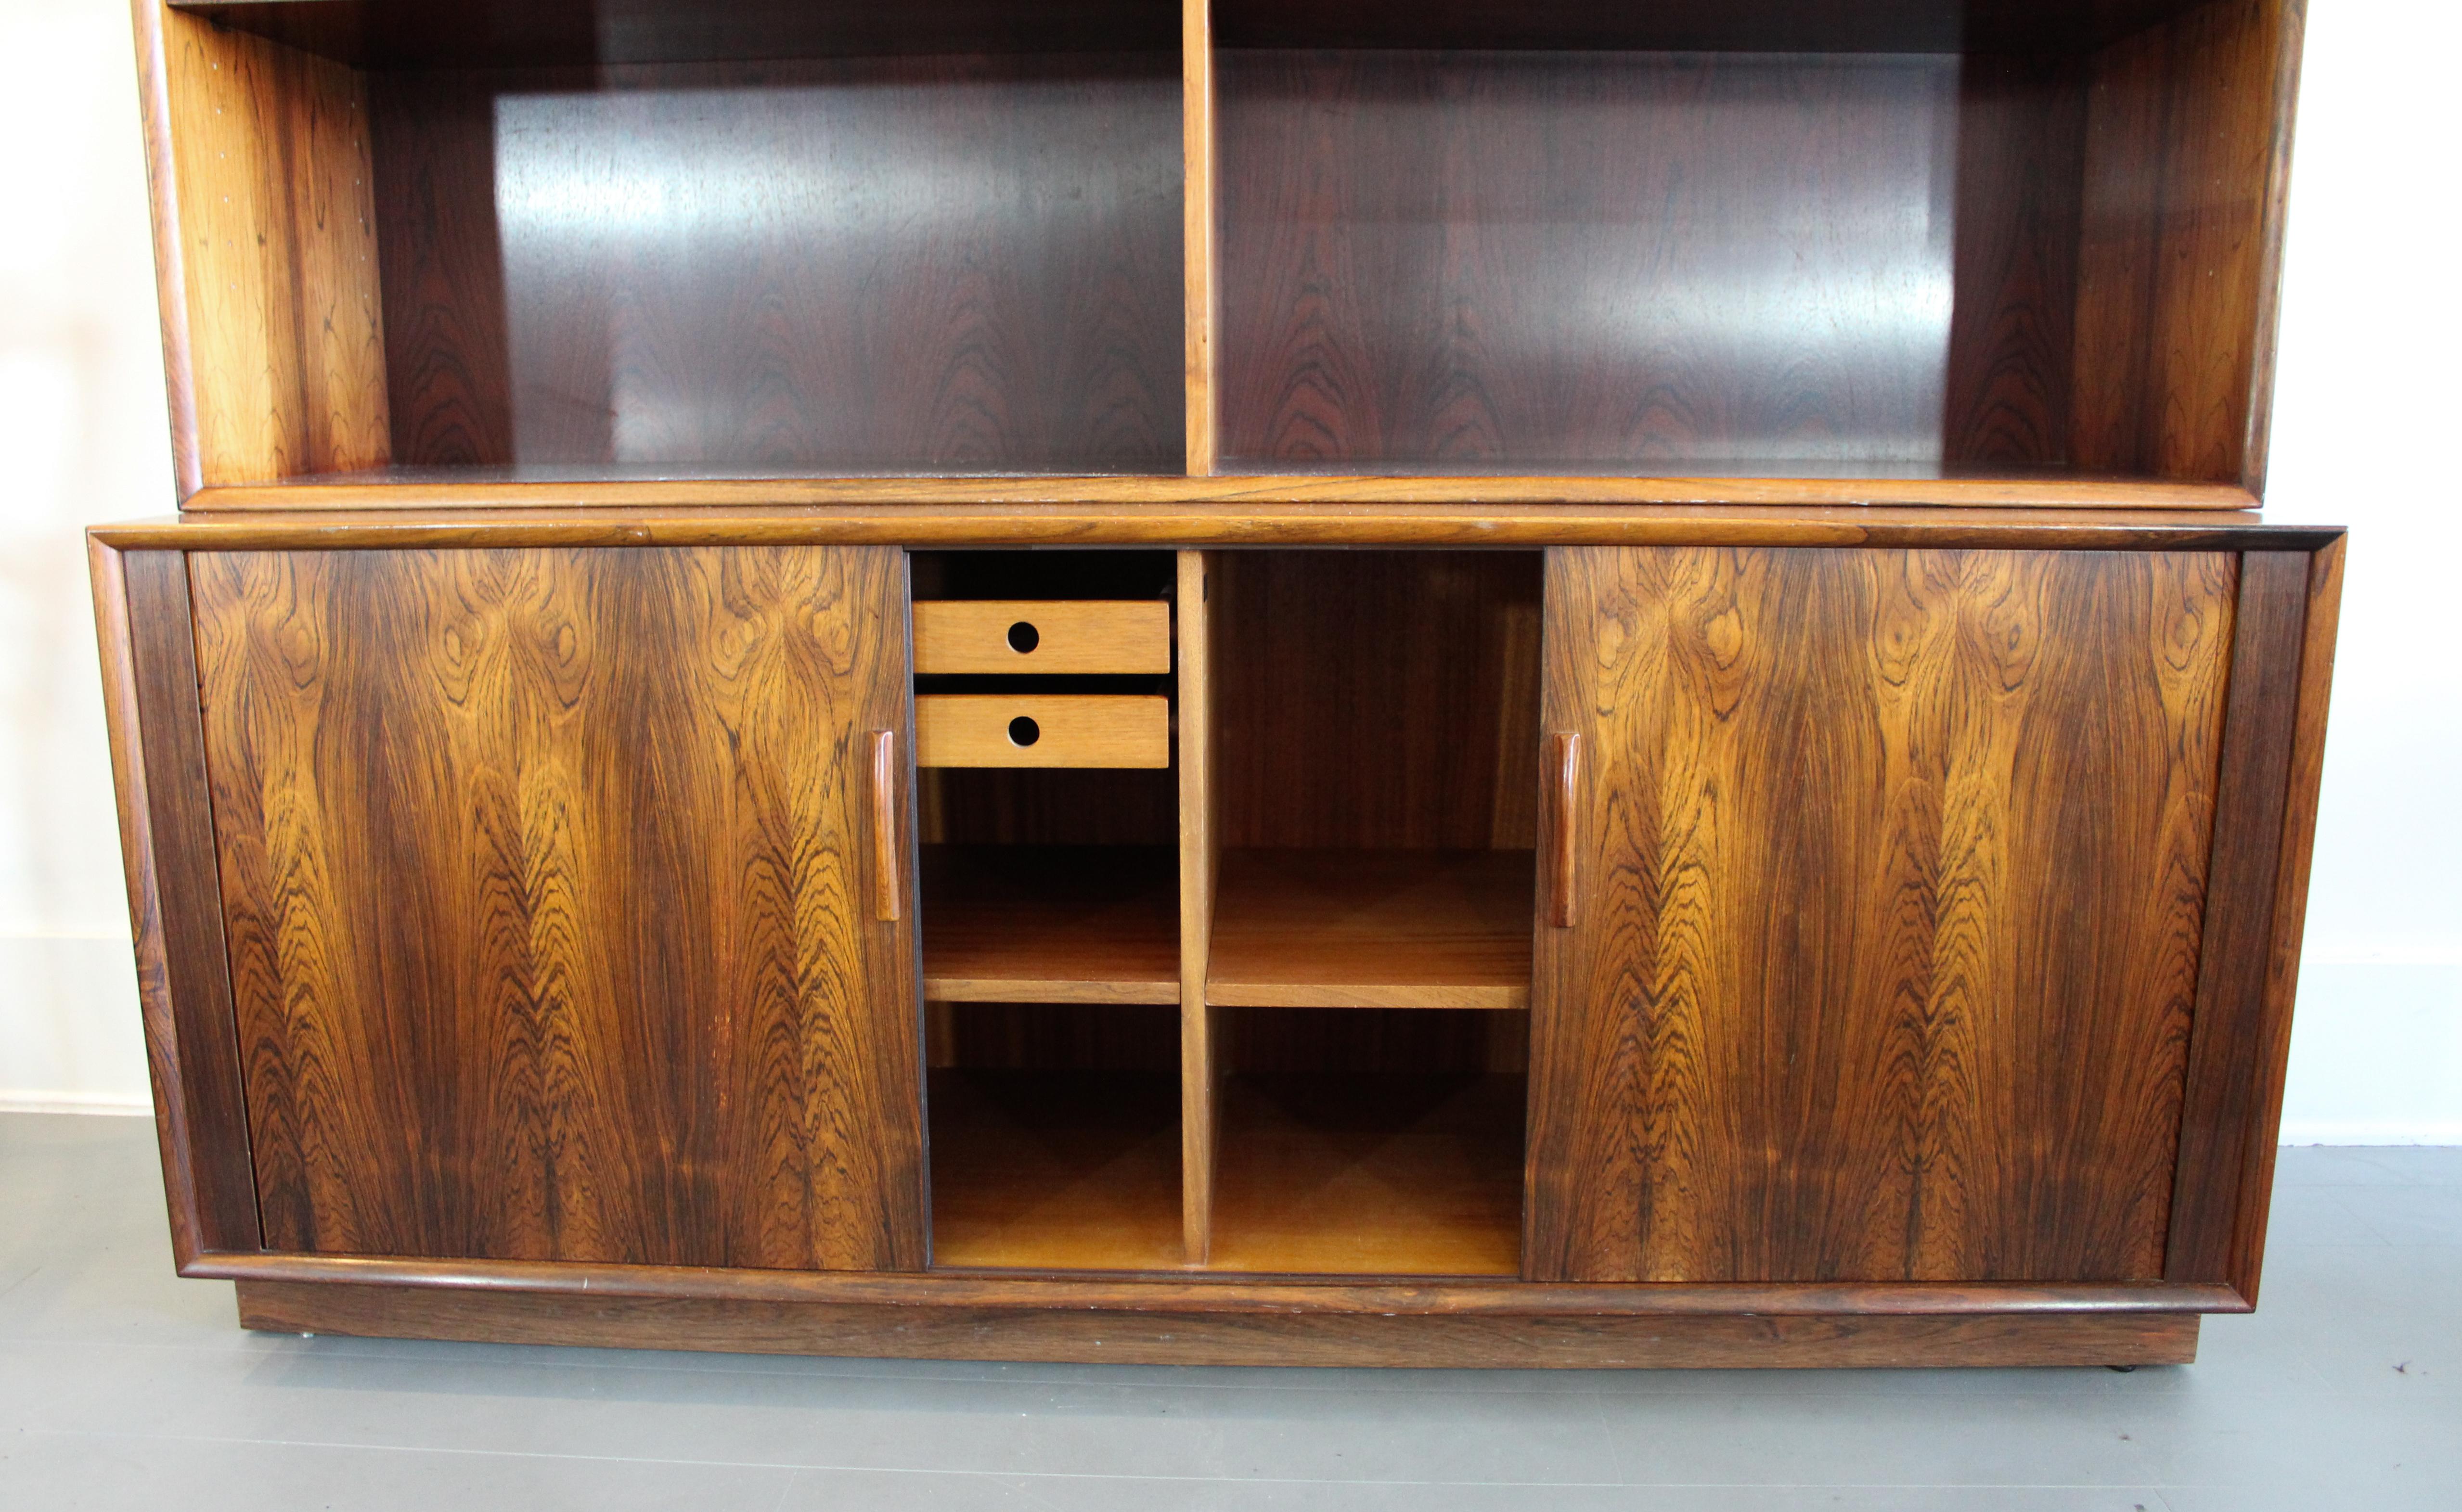 Midcentury Rosewood Arne Vodder Book Case with Tambour Doors by Sibast, 1950s For Sale 5